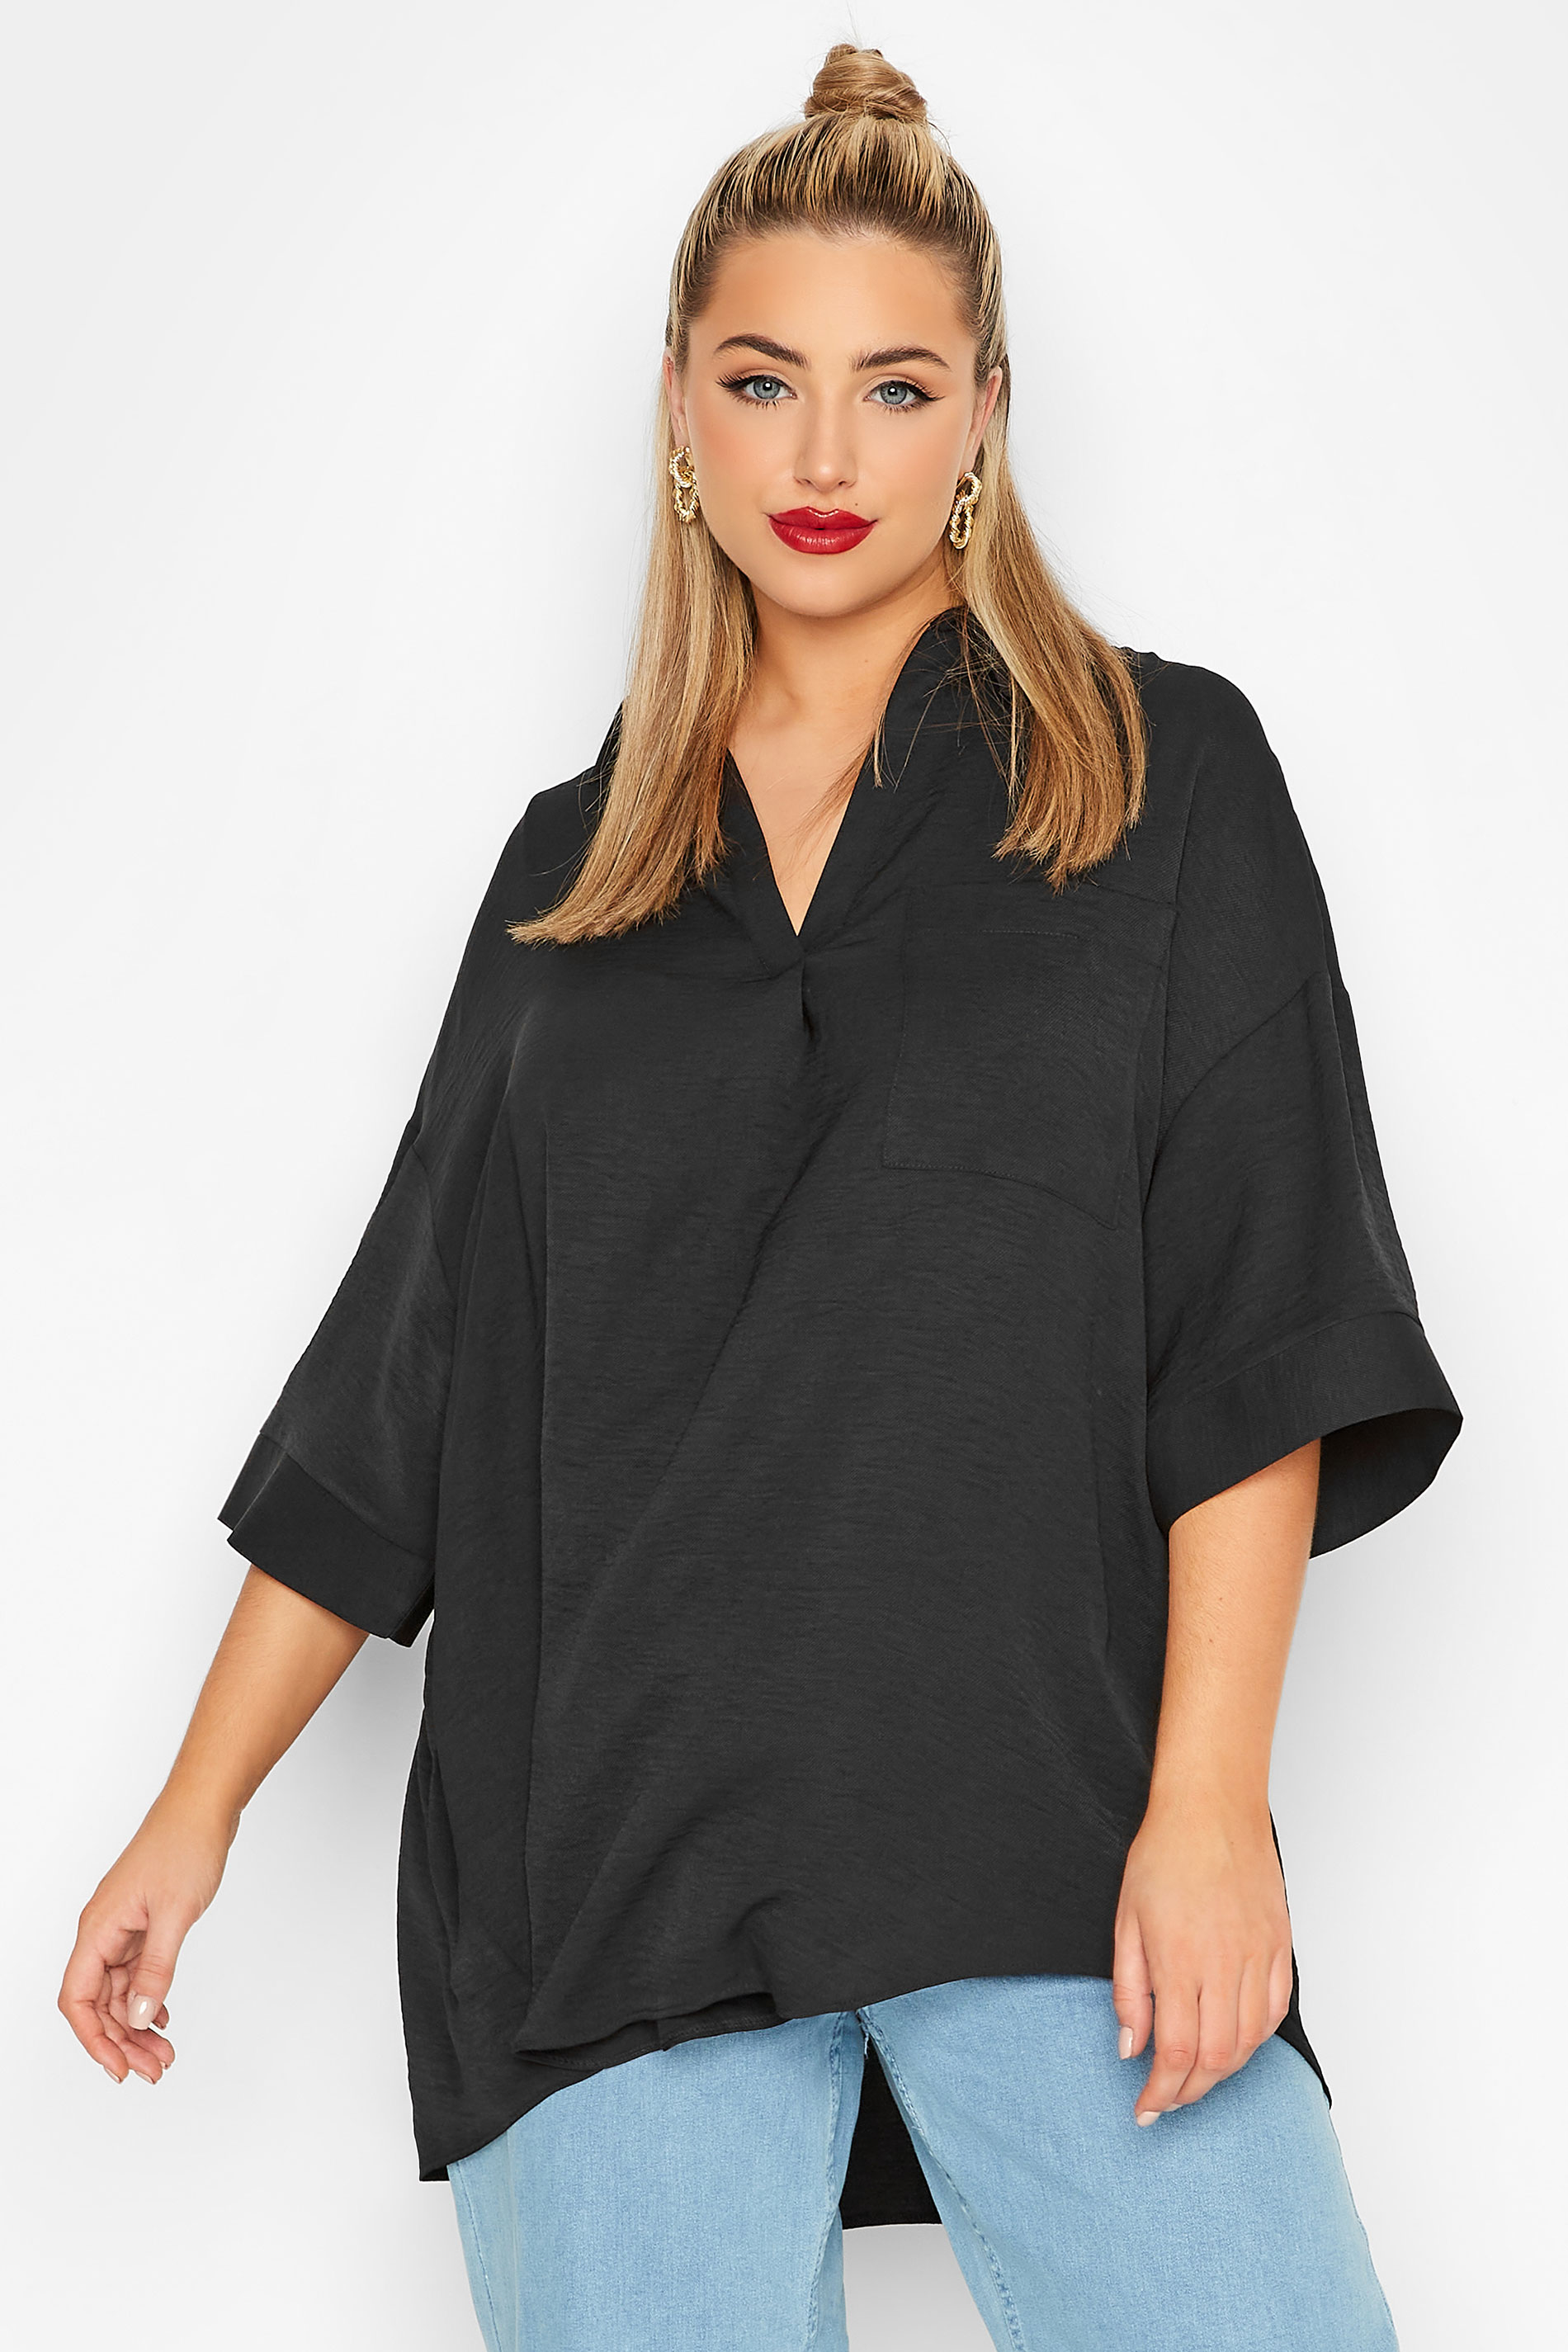 LIMITED COLLECTION Curve Black Pleated Front Top 1